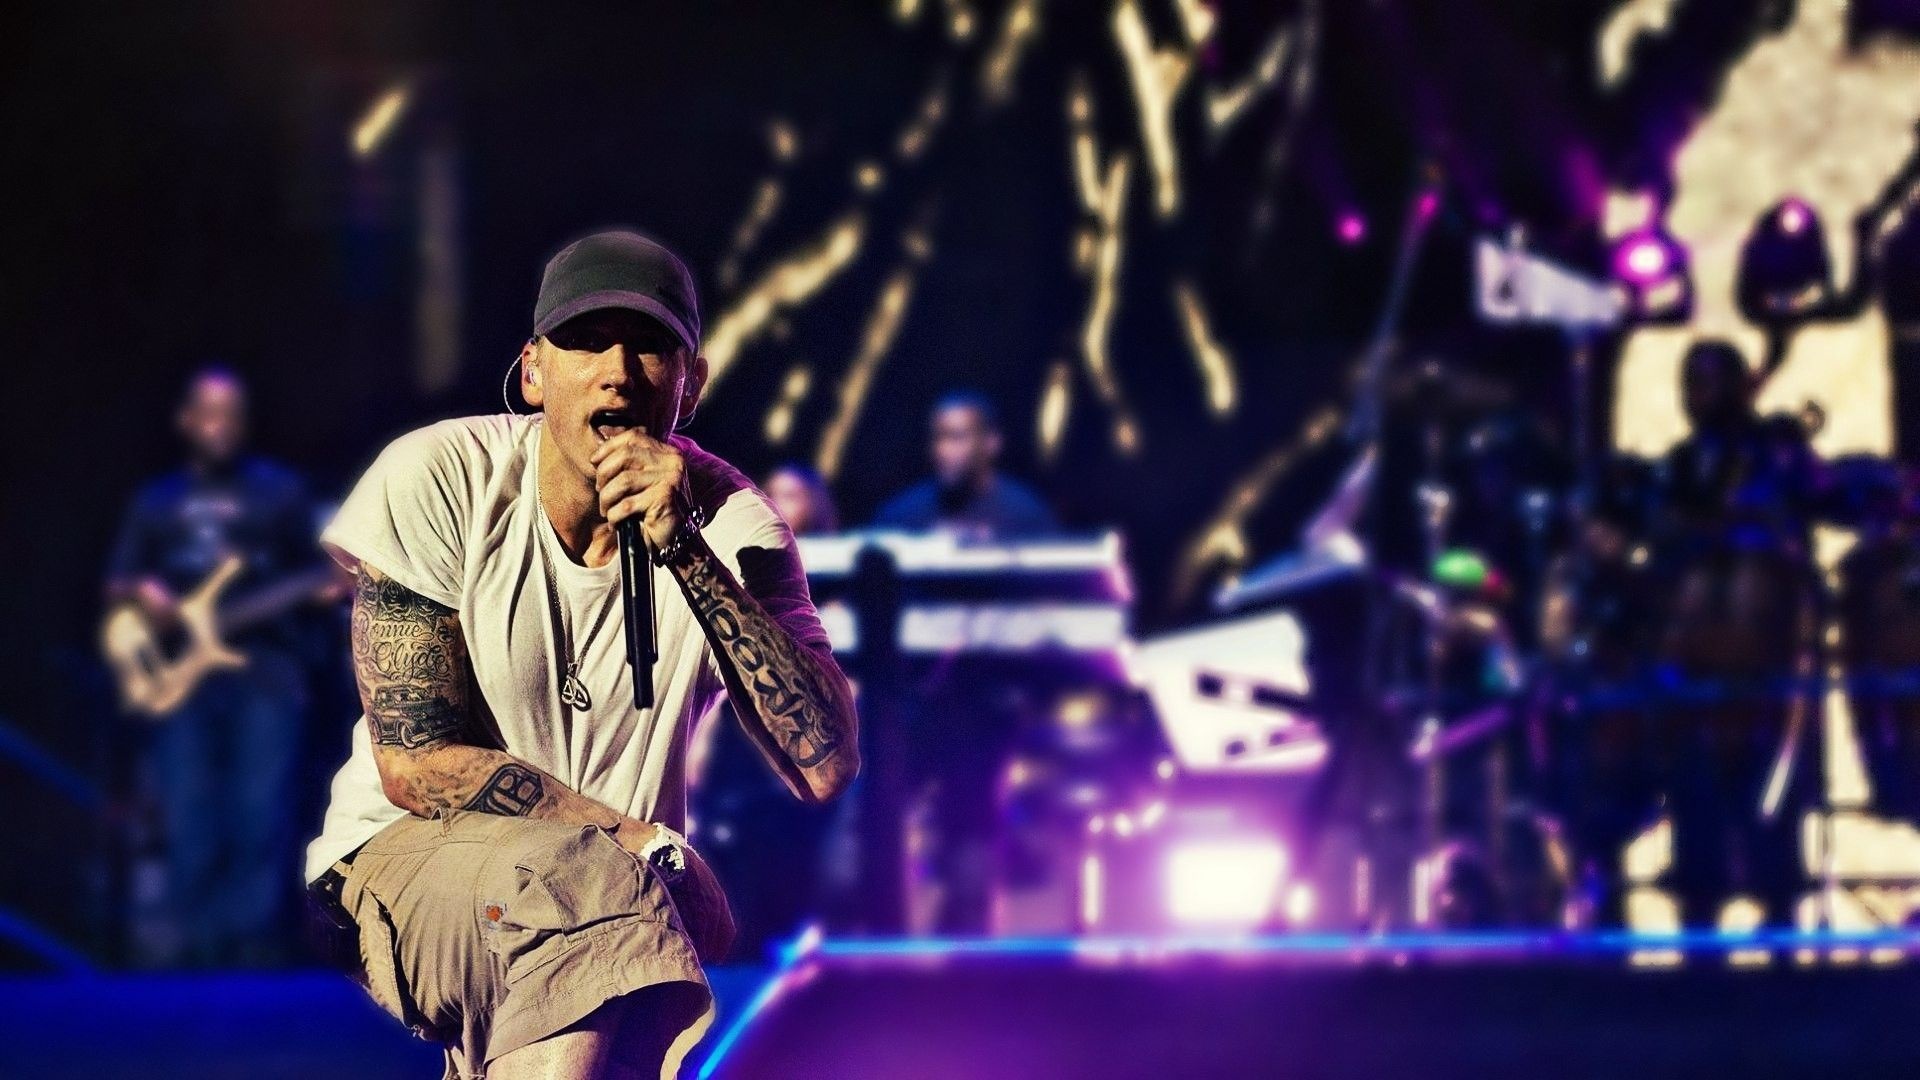 Concert: Eminem, An American rapper, songwriter and record producer, Slim Shady, 2016. 1920x1080 Full HD Background.